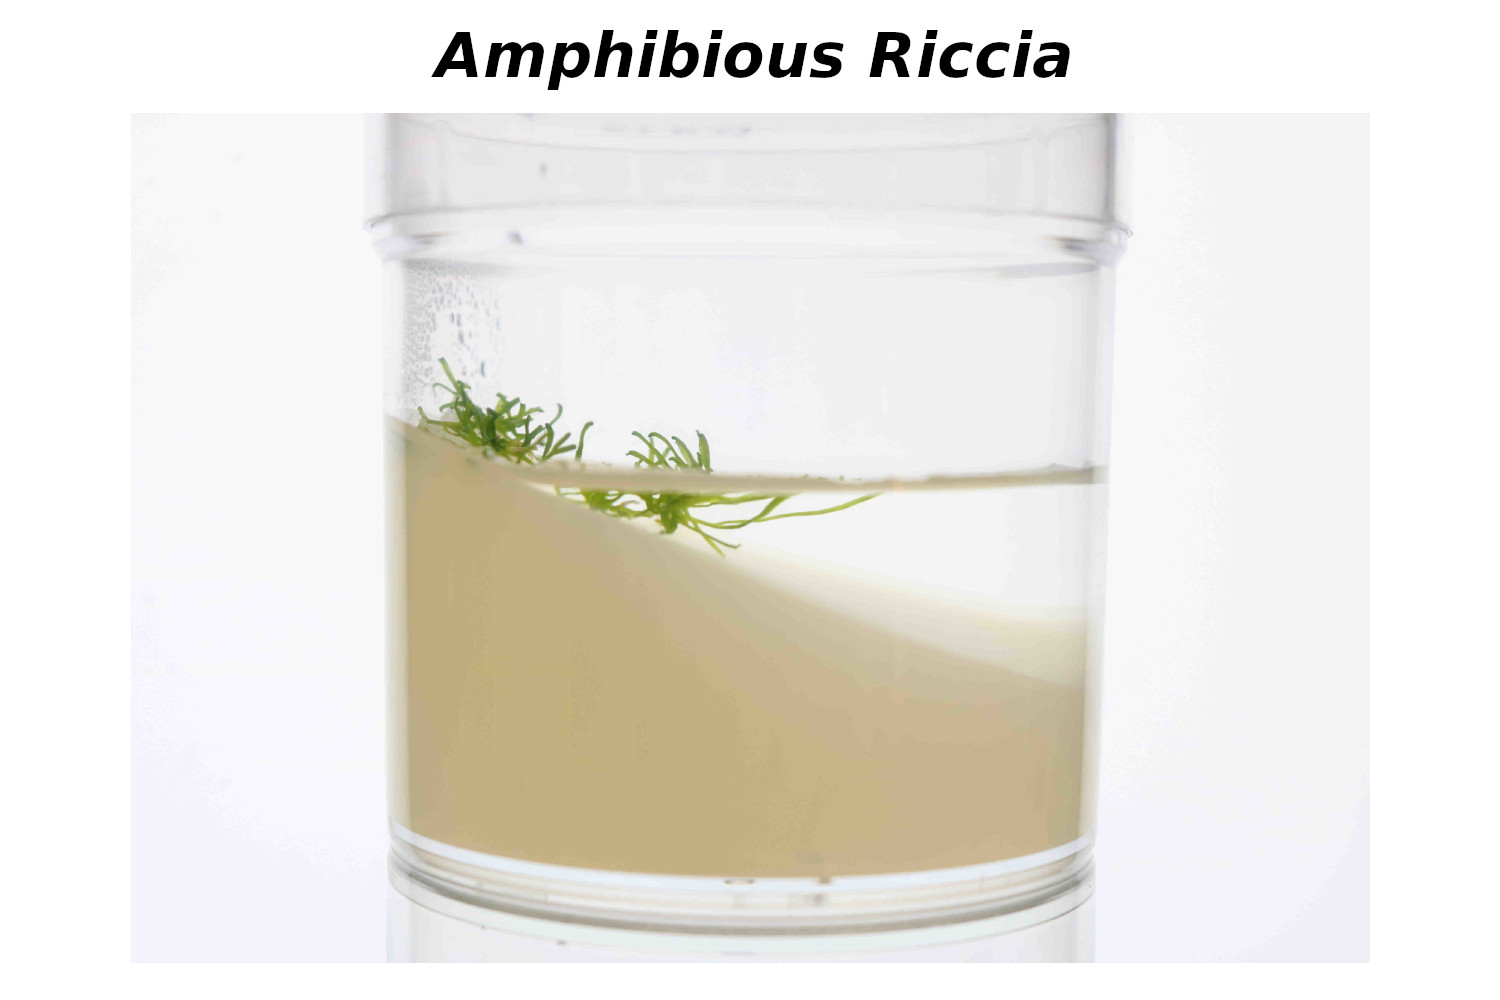 The liverwort <i>Riccia fluitans</i> can live in water and on land, making it ideal to study terrestrial adaptation processes. We are currently establishing transformation and sexual structure induction methods. <br>Althoff and Zachgo; International Journal of Molecular Sciences, 2020